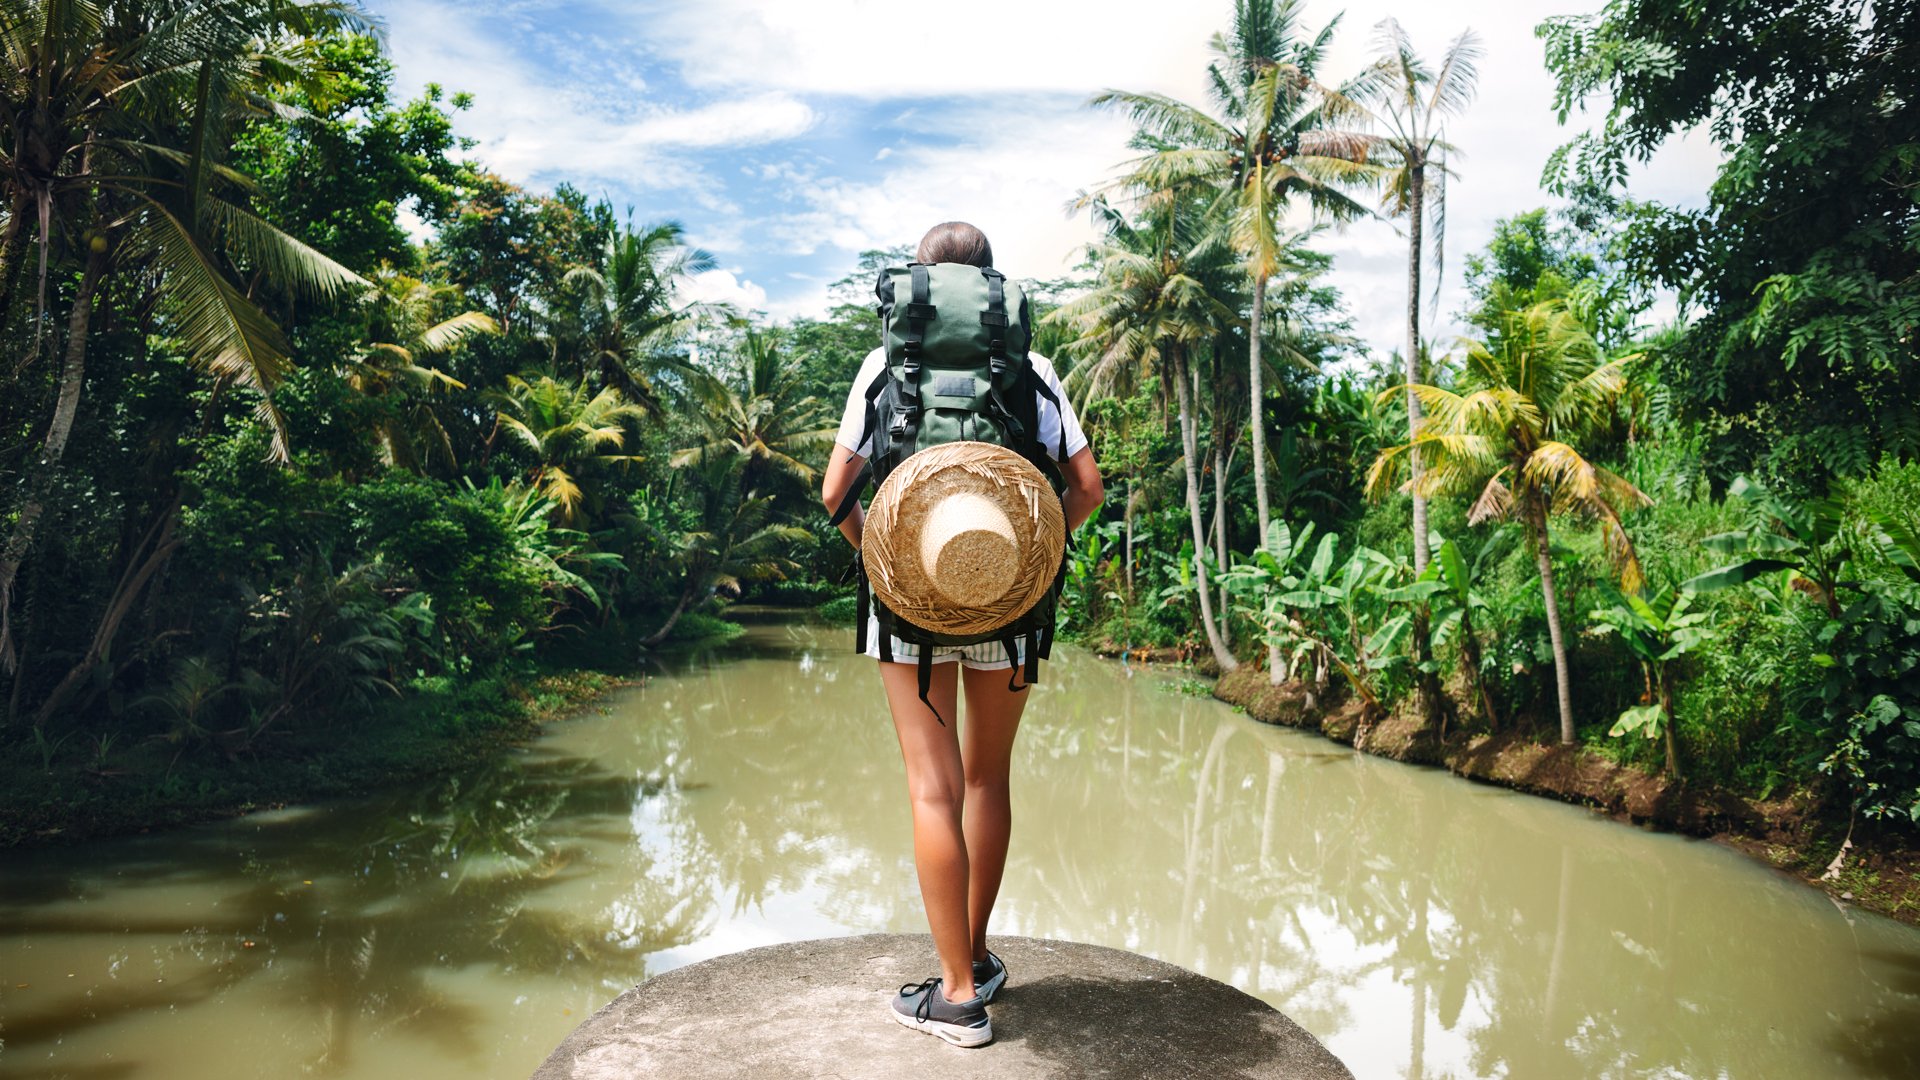 21 Mistakes That Can Blow Your Budget While Traveling